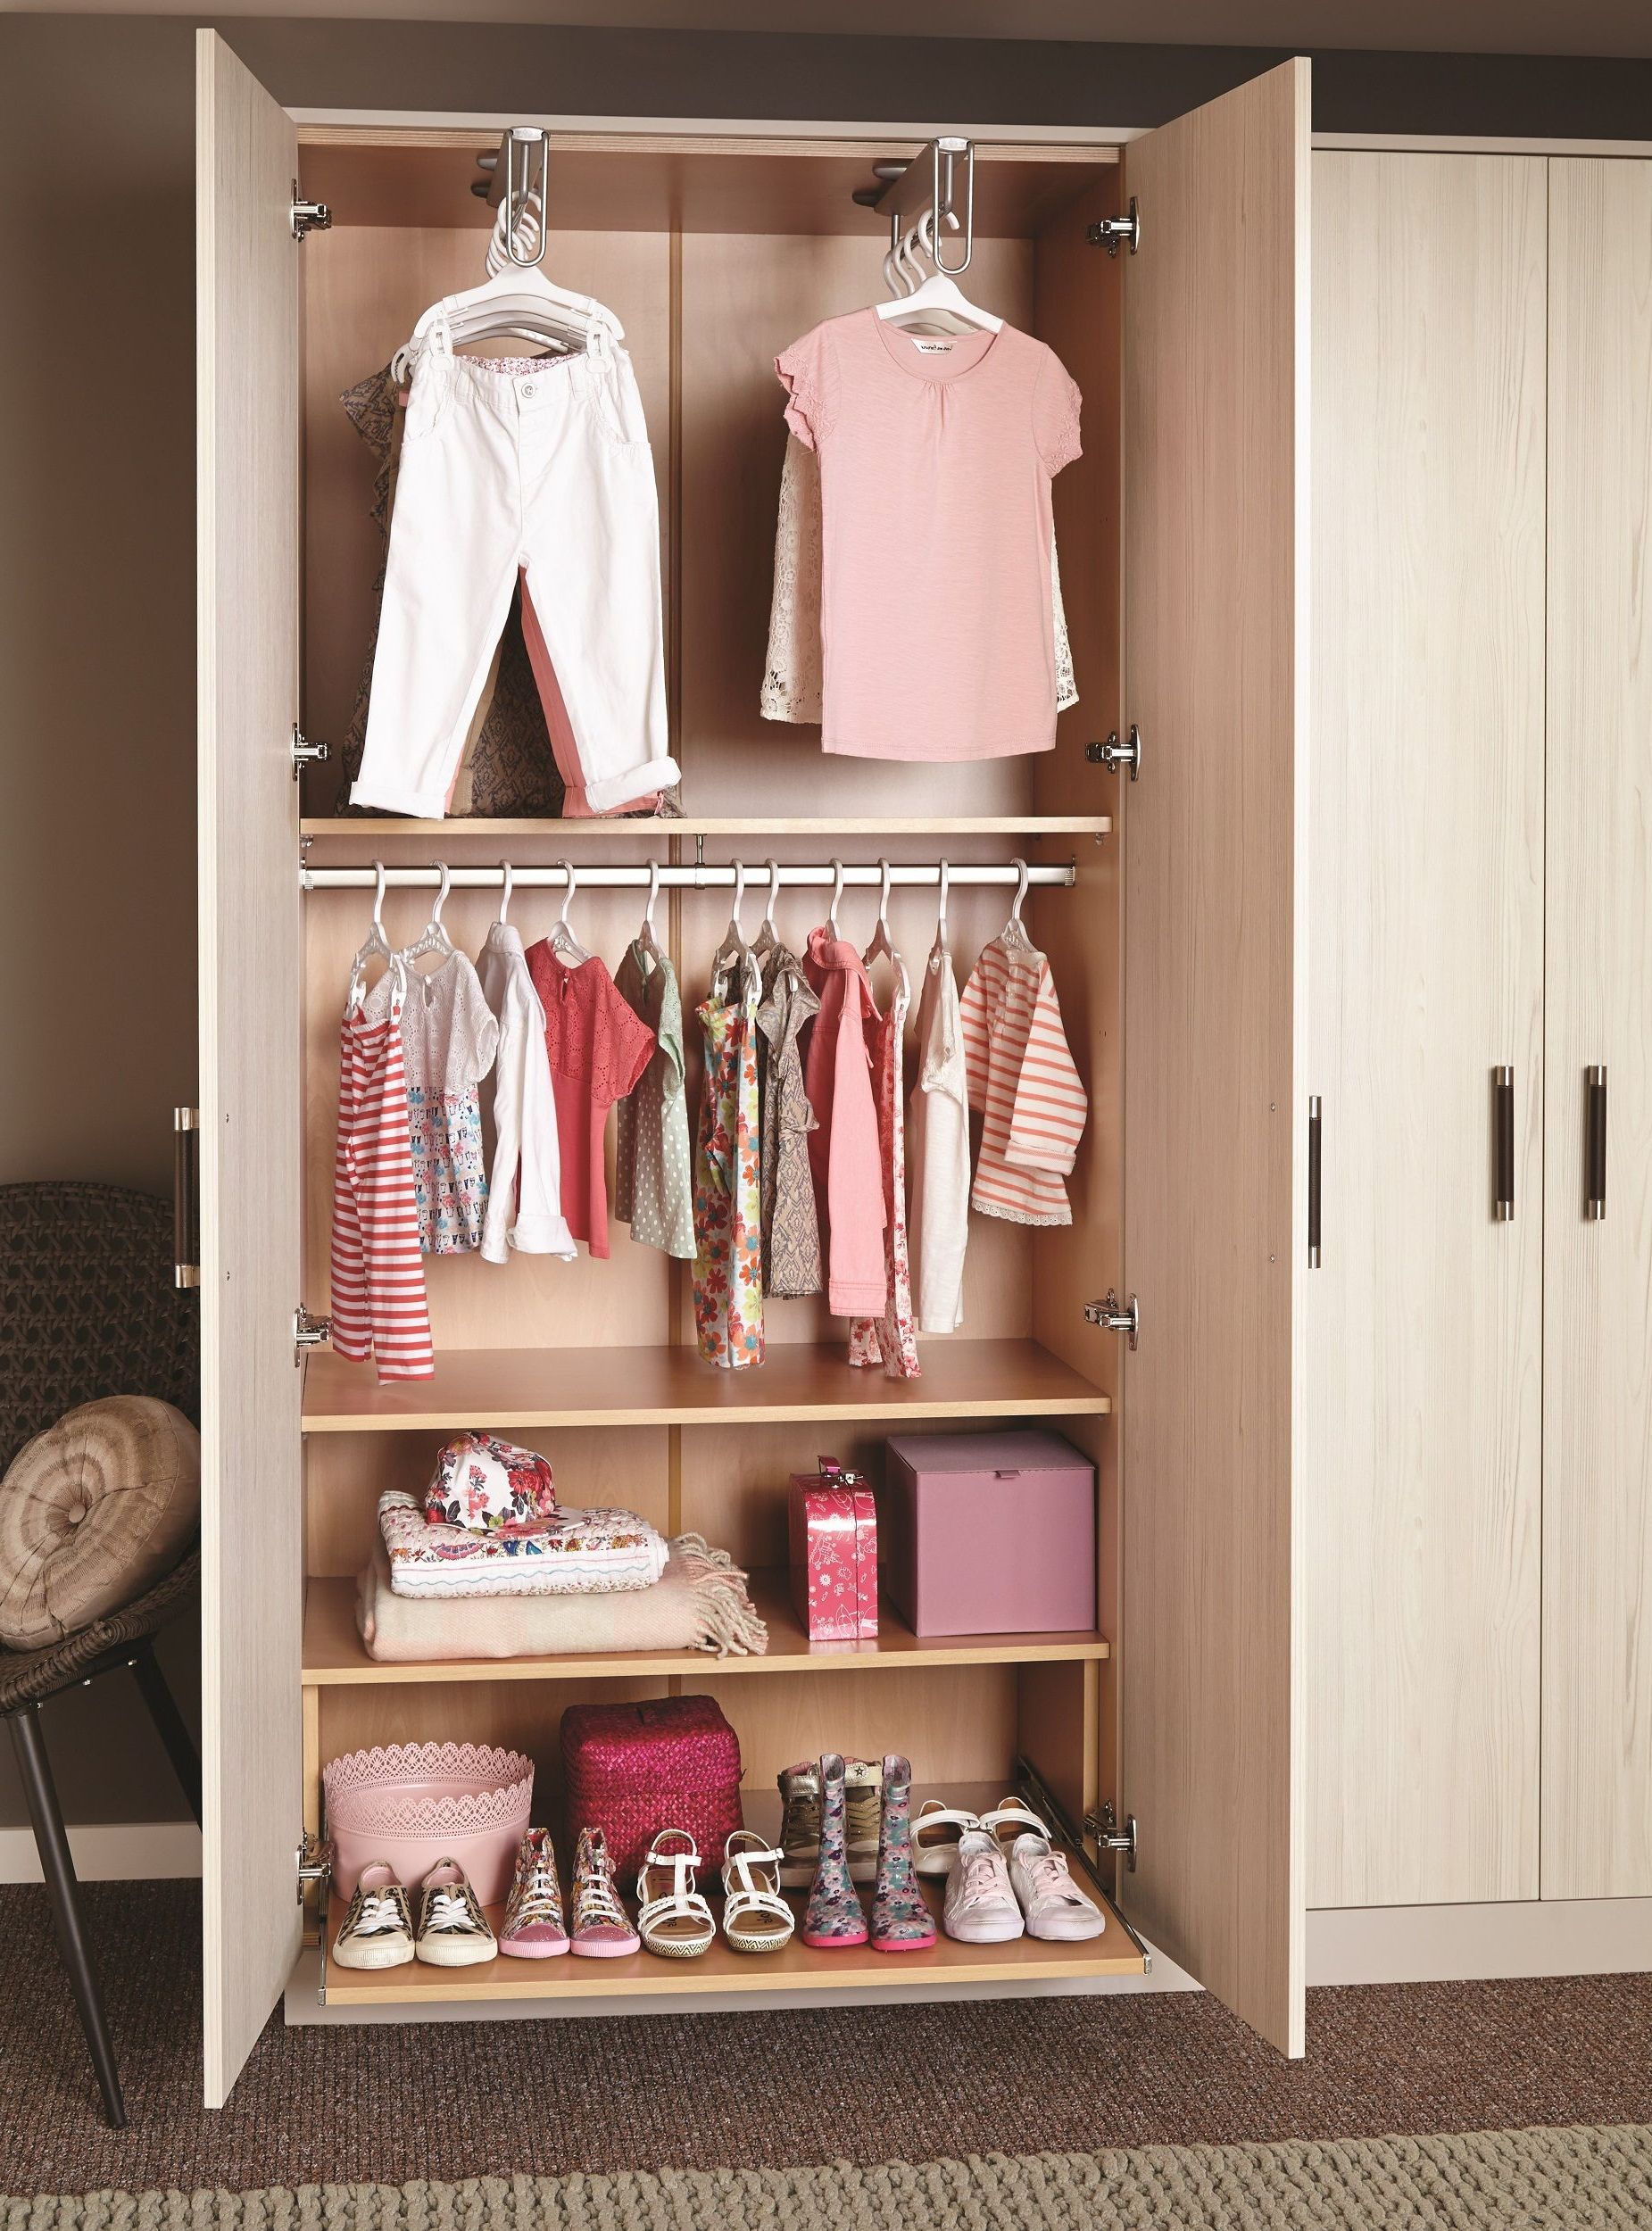 Pinterest Within Double Rail Nursery Wardrobes (Gallery 1 of 20)